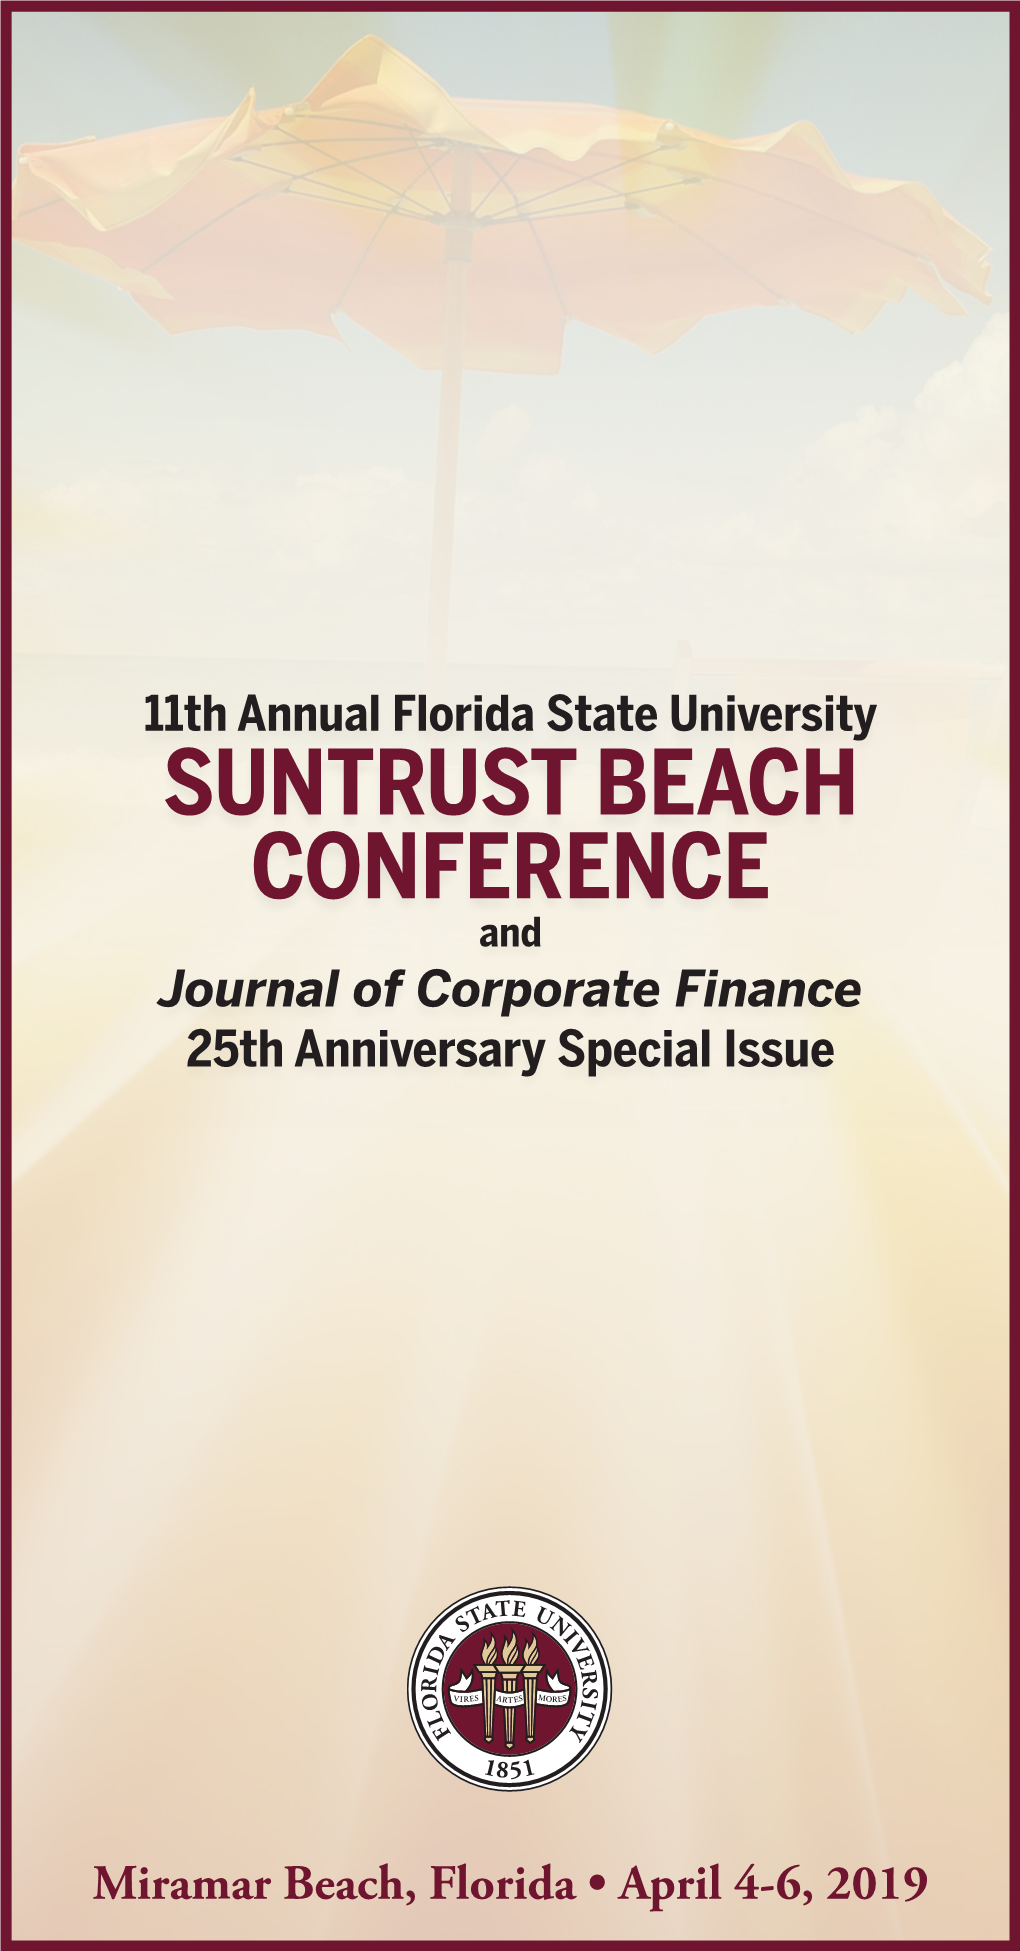 SUNTRUST BEACH CONFERENCE and Journal of Corporate Finance 25Th Anniversary Special Issue